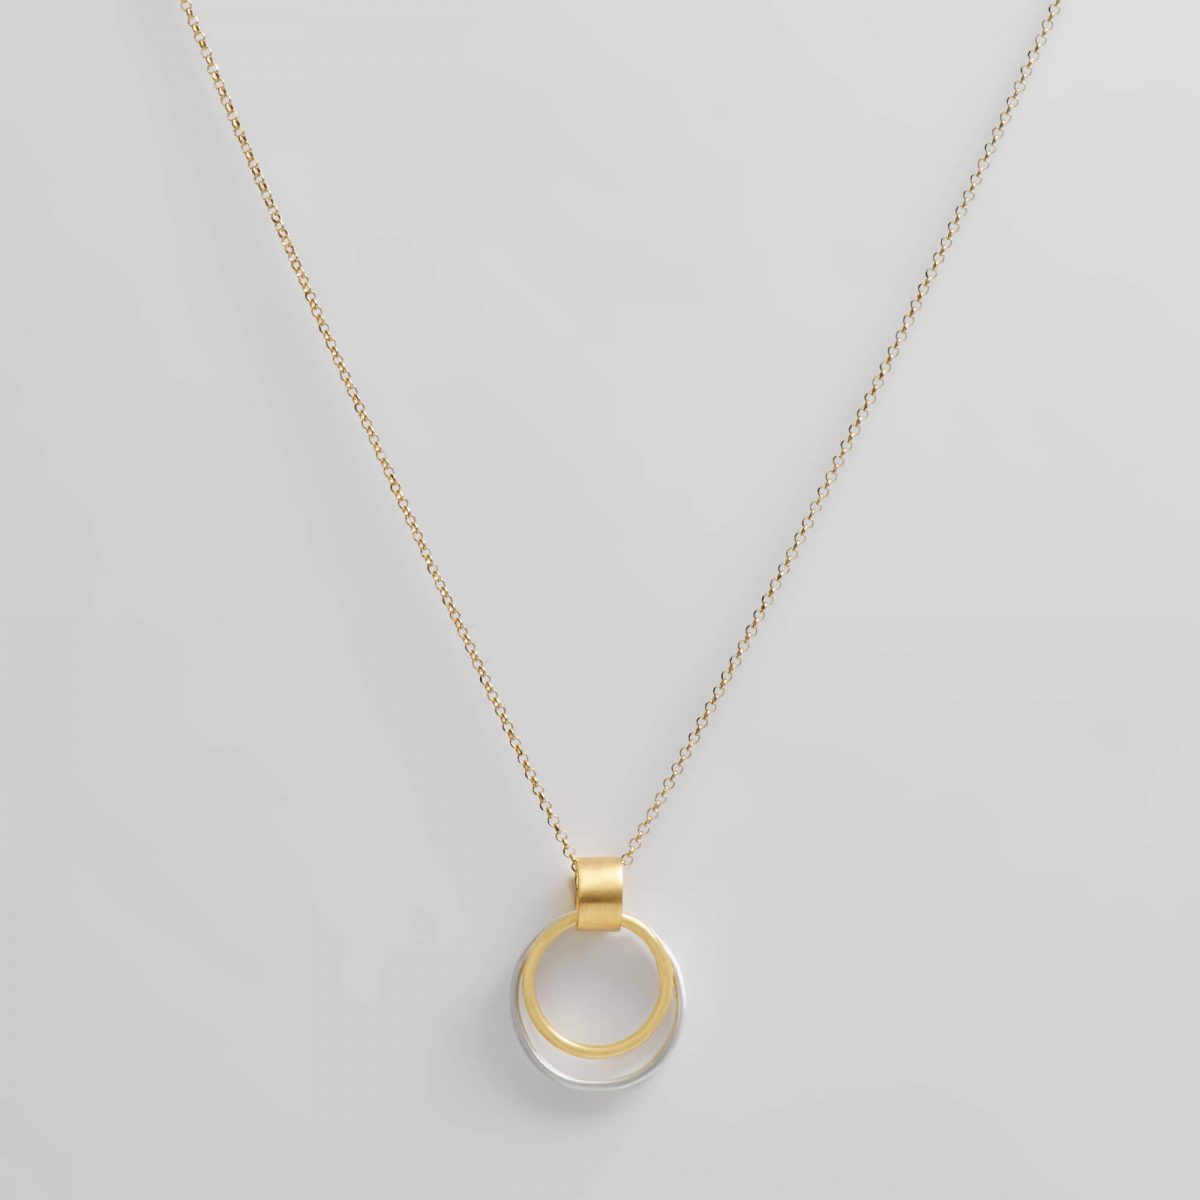 Gold and Silver Cora Necklace by Xoutou's